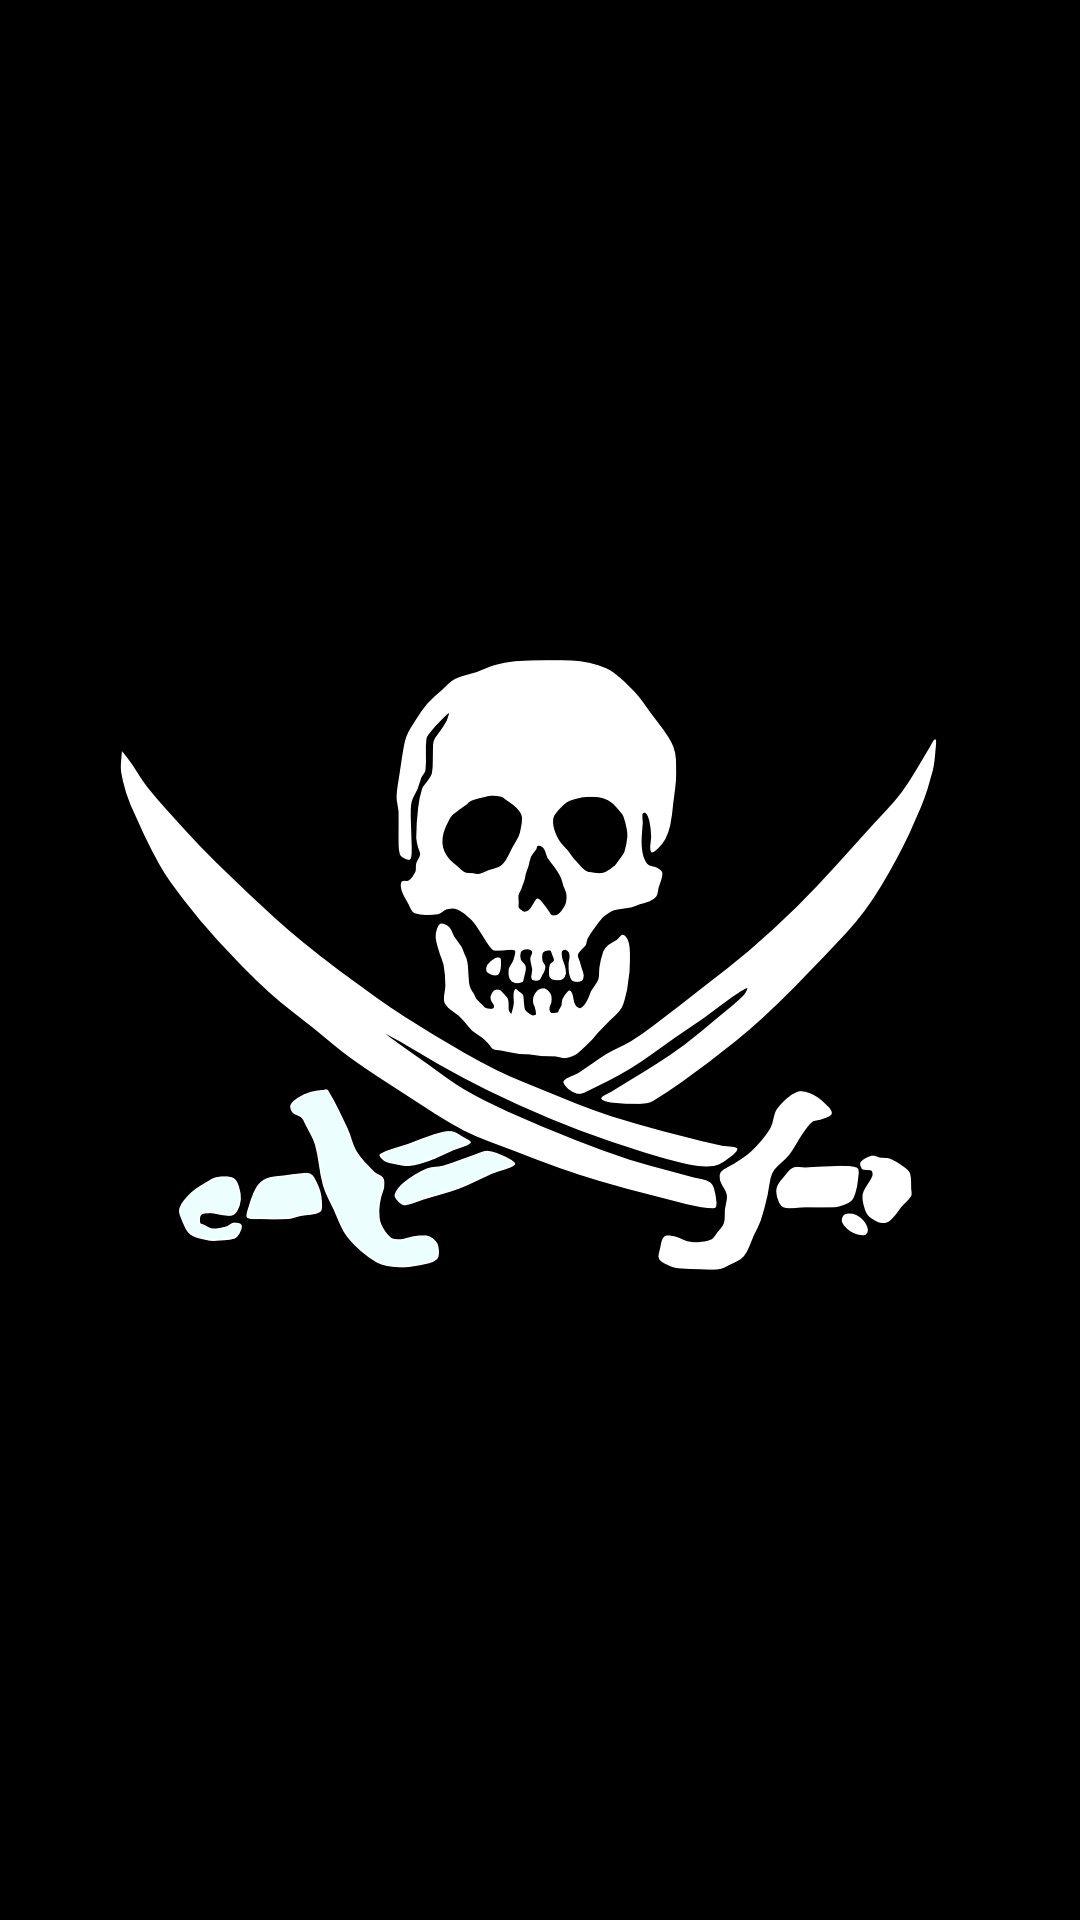 Jolly Roger Pirate Skull Black And White Android Wallpaper free download